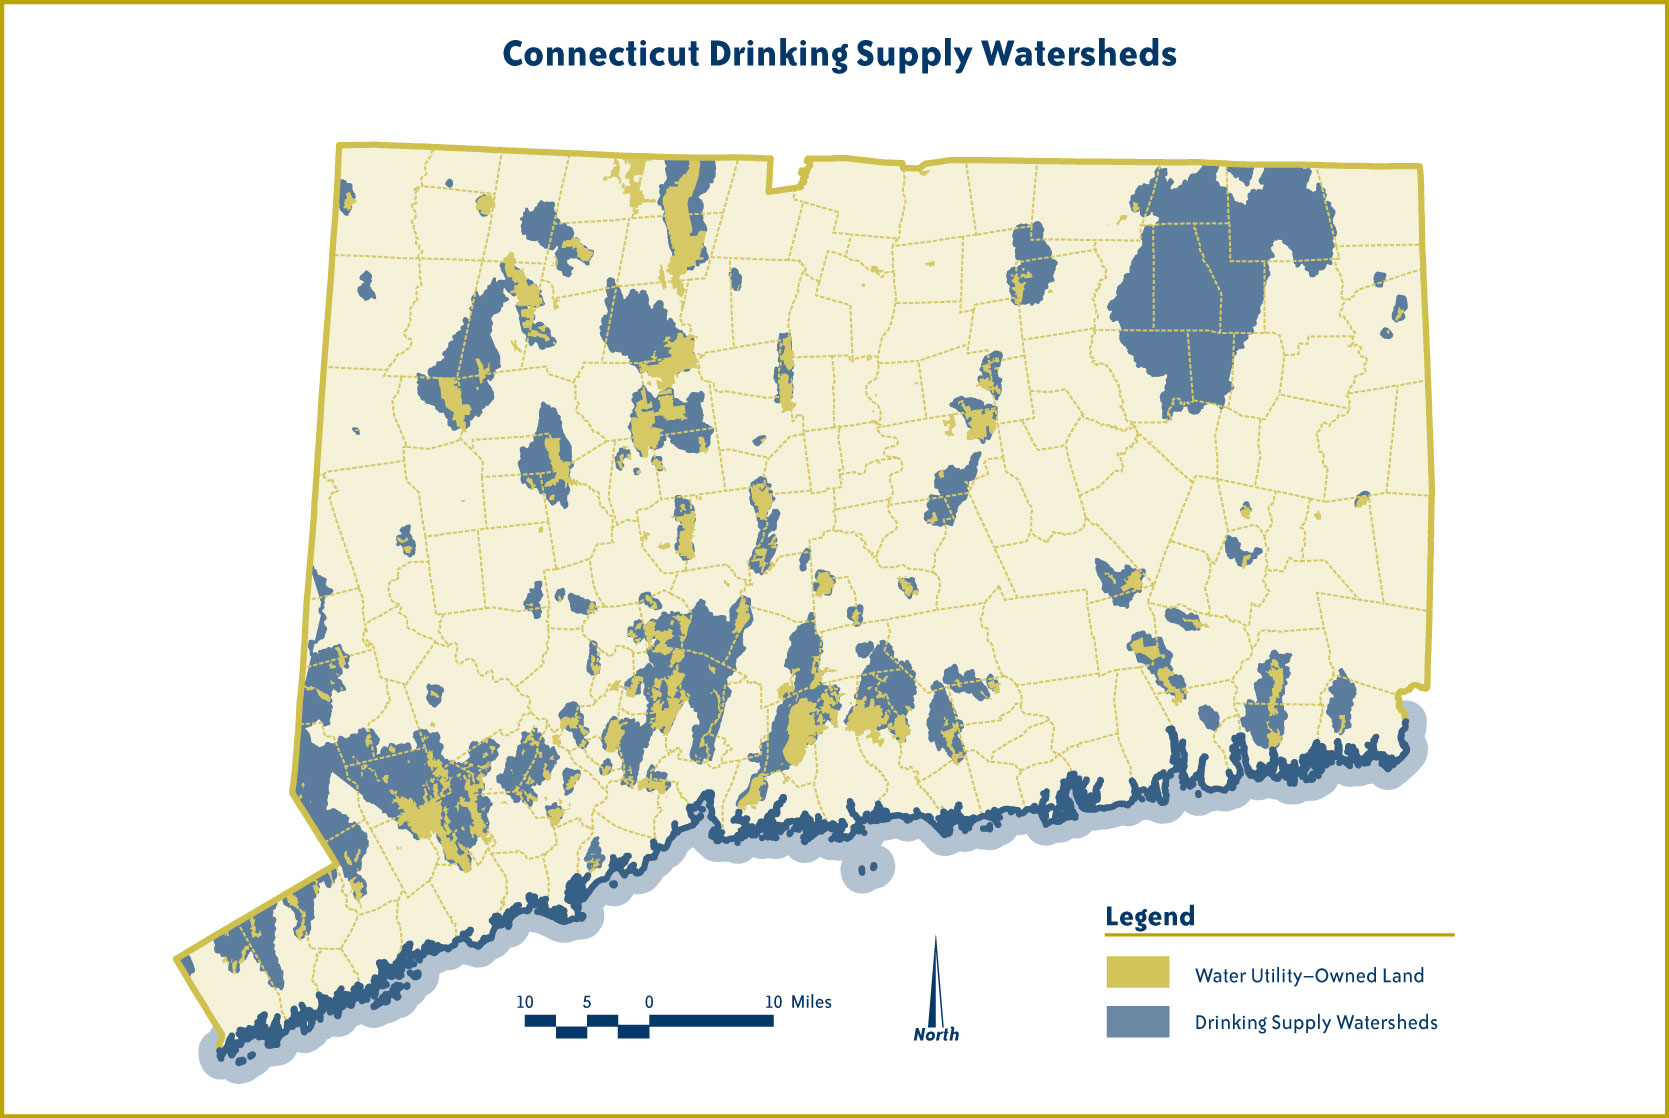 A map of drinking water watersheds in ConnecticutMap courtesy of The Trust for Public Land